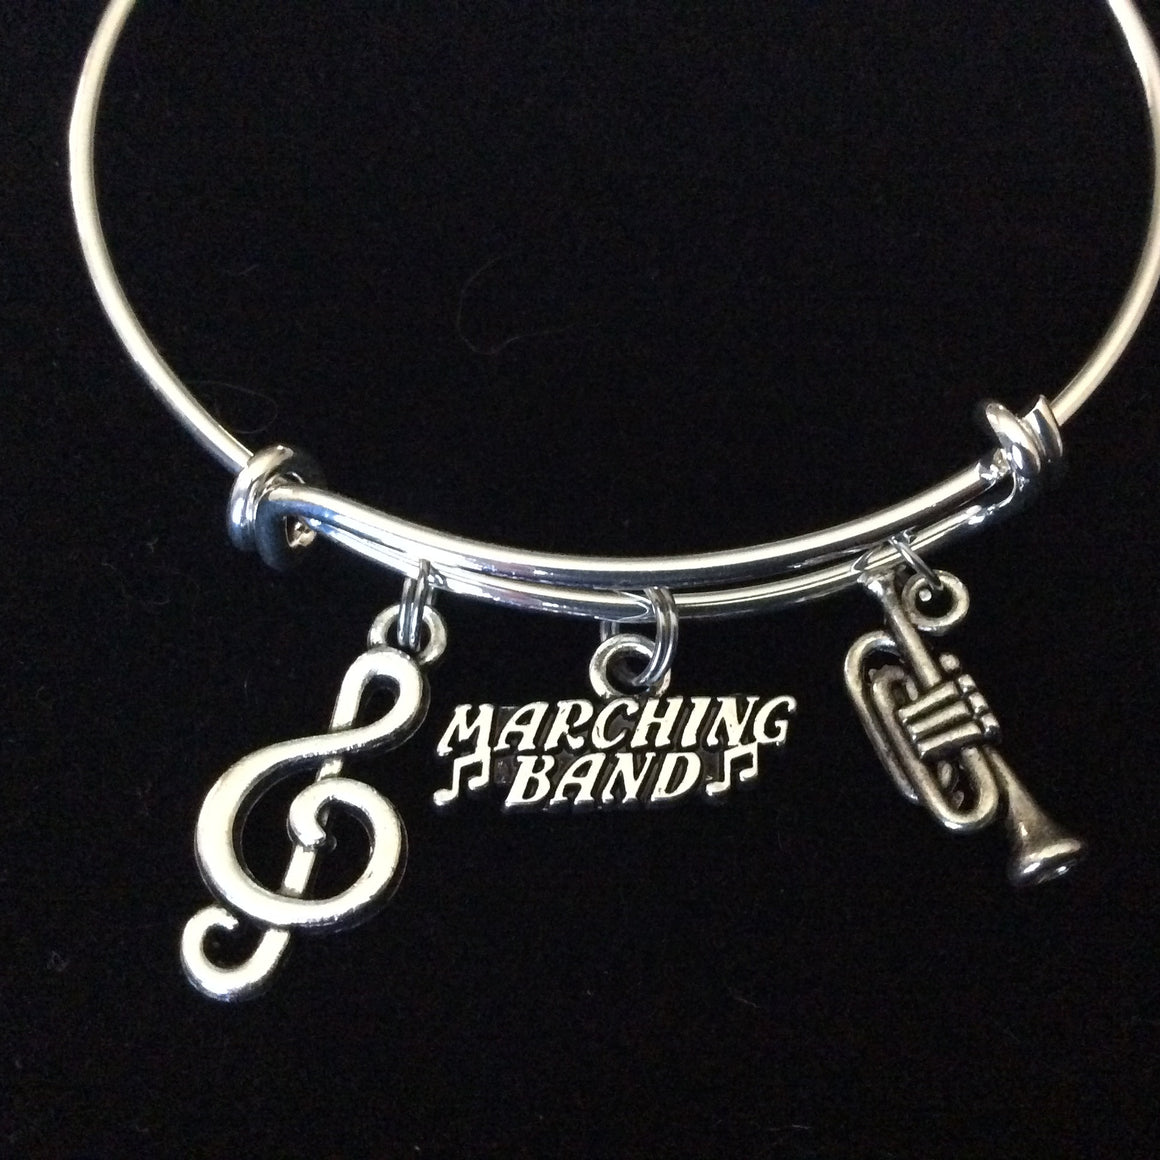 Musical Notes Marching Band Silver Trumpet Charm Expandable Bracelet Adjustable Wire Bangle Gift Trendy Musician Music teacher Notes Handmade Inspired